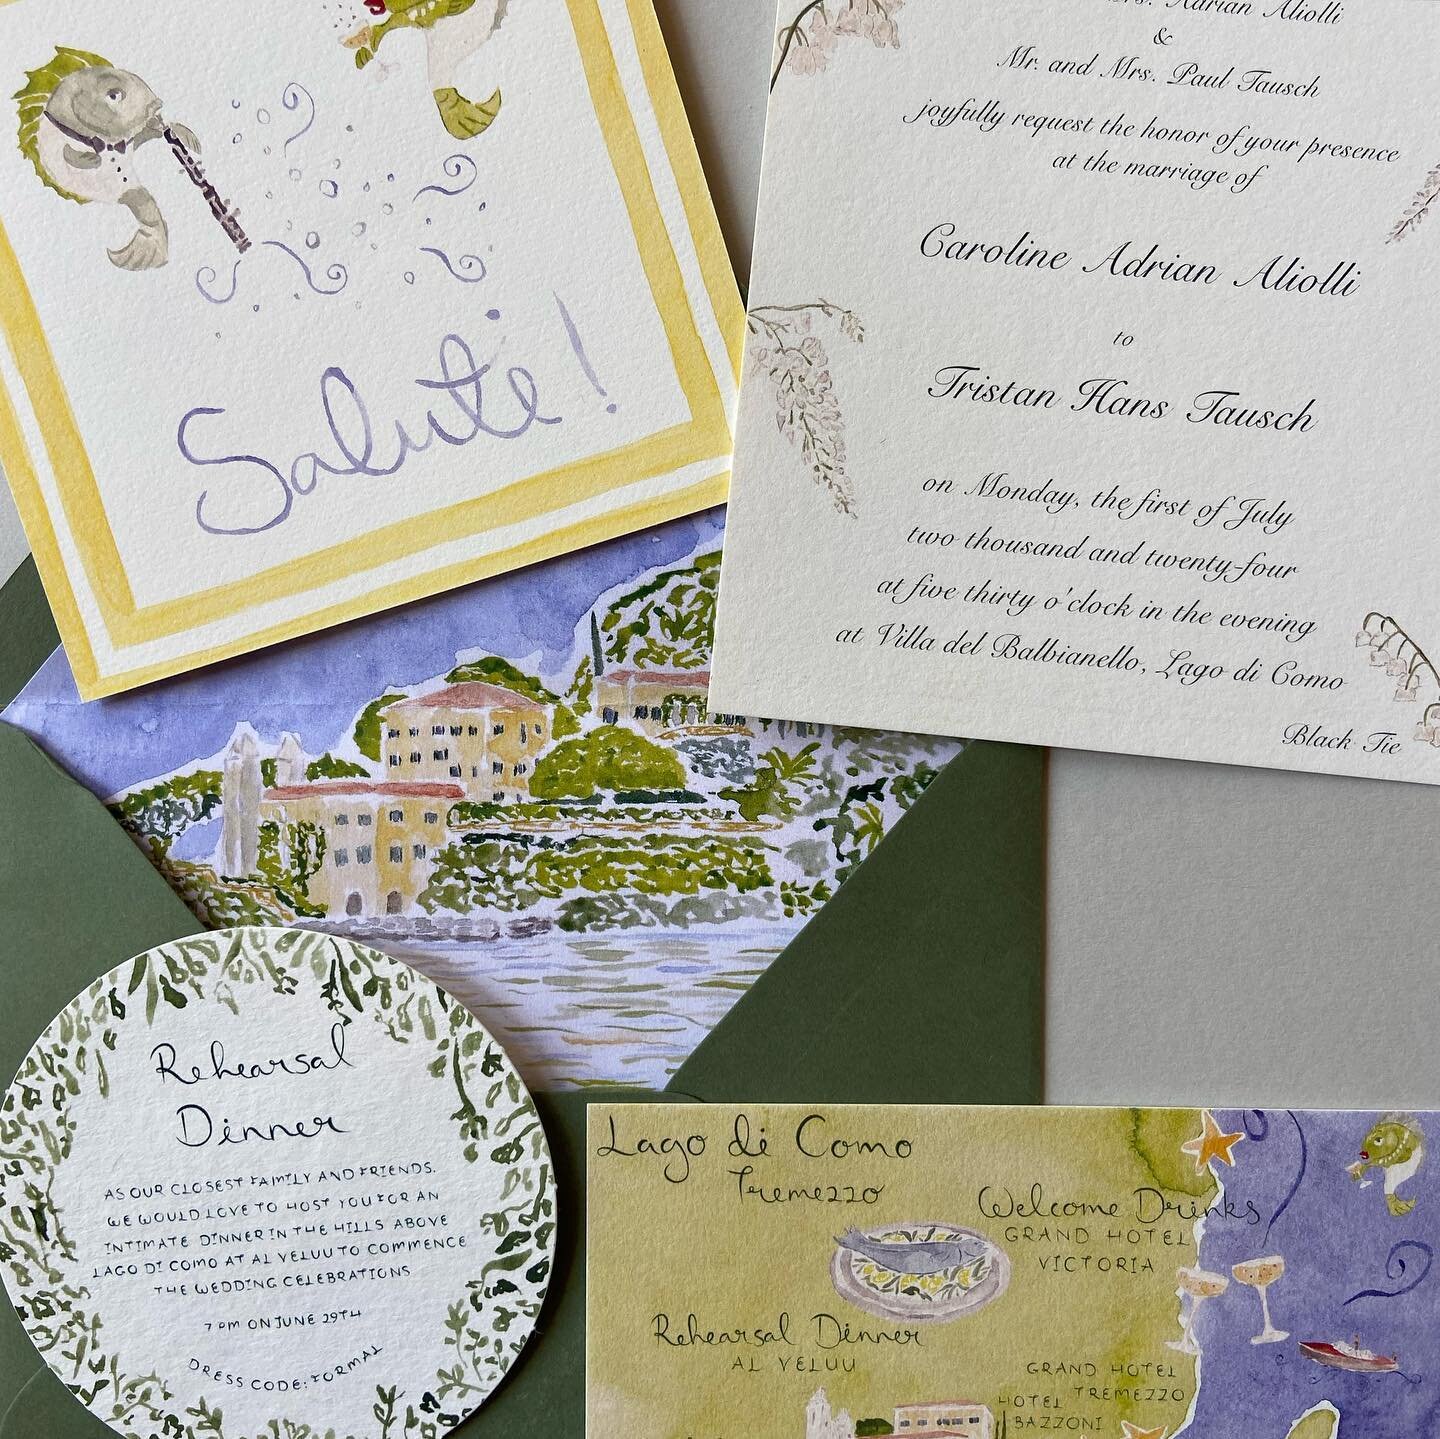 Every detail of this invitation suite is steeped in the romance of Lake Como 🇫🇷